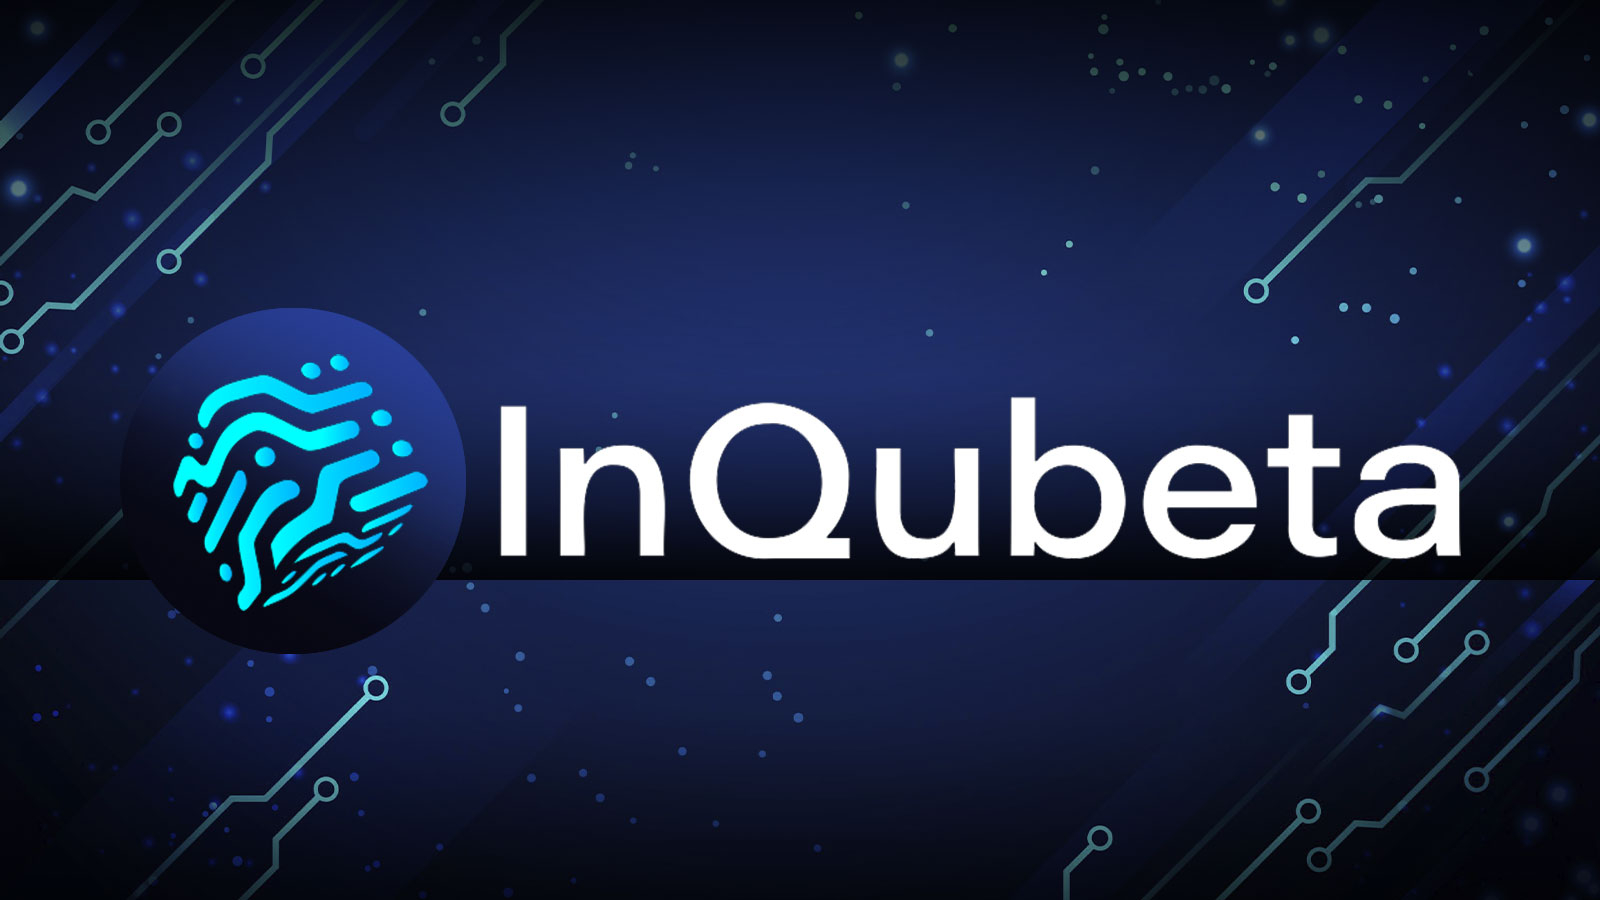 InQubeta (QUBE) Crypto Sale Welcomes Fresh Investors as Ethereum (ETH), Injective (INJ) Getting Closer to Updates